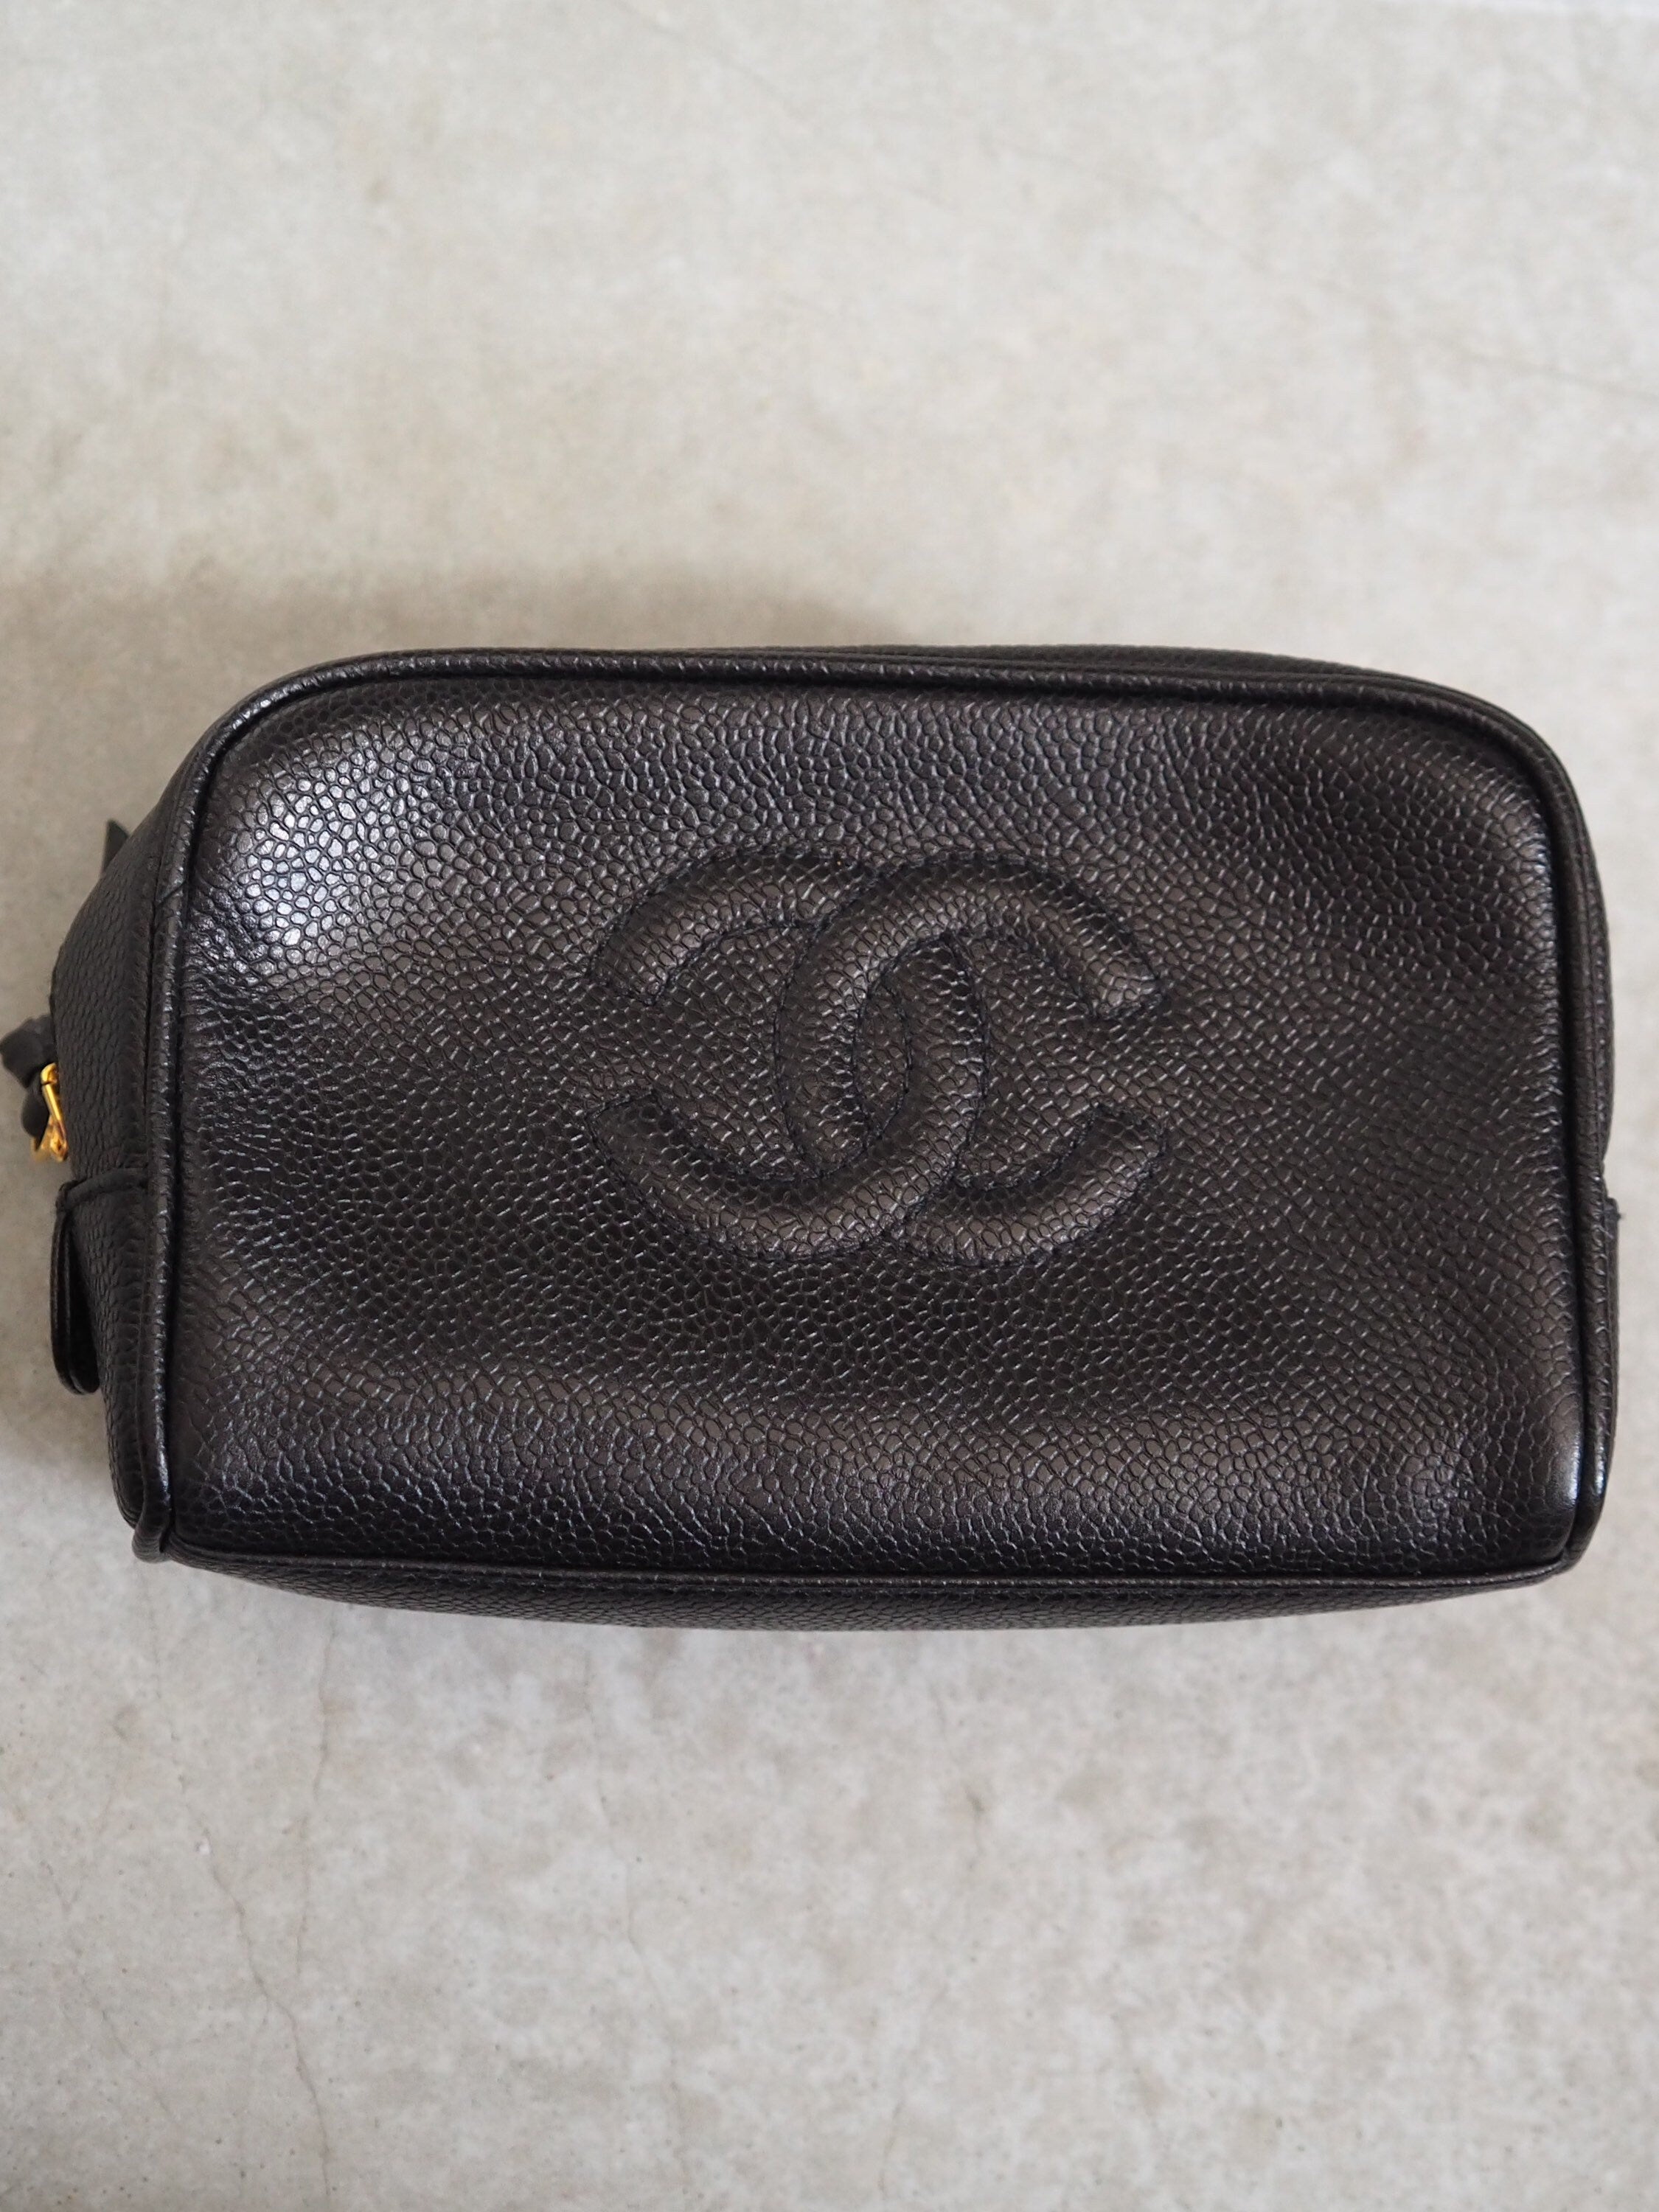 CHANEL COCO Mark Cosmetic Pouch Purse Caviar Skin Leather Black Authentic Vintage